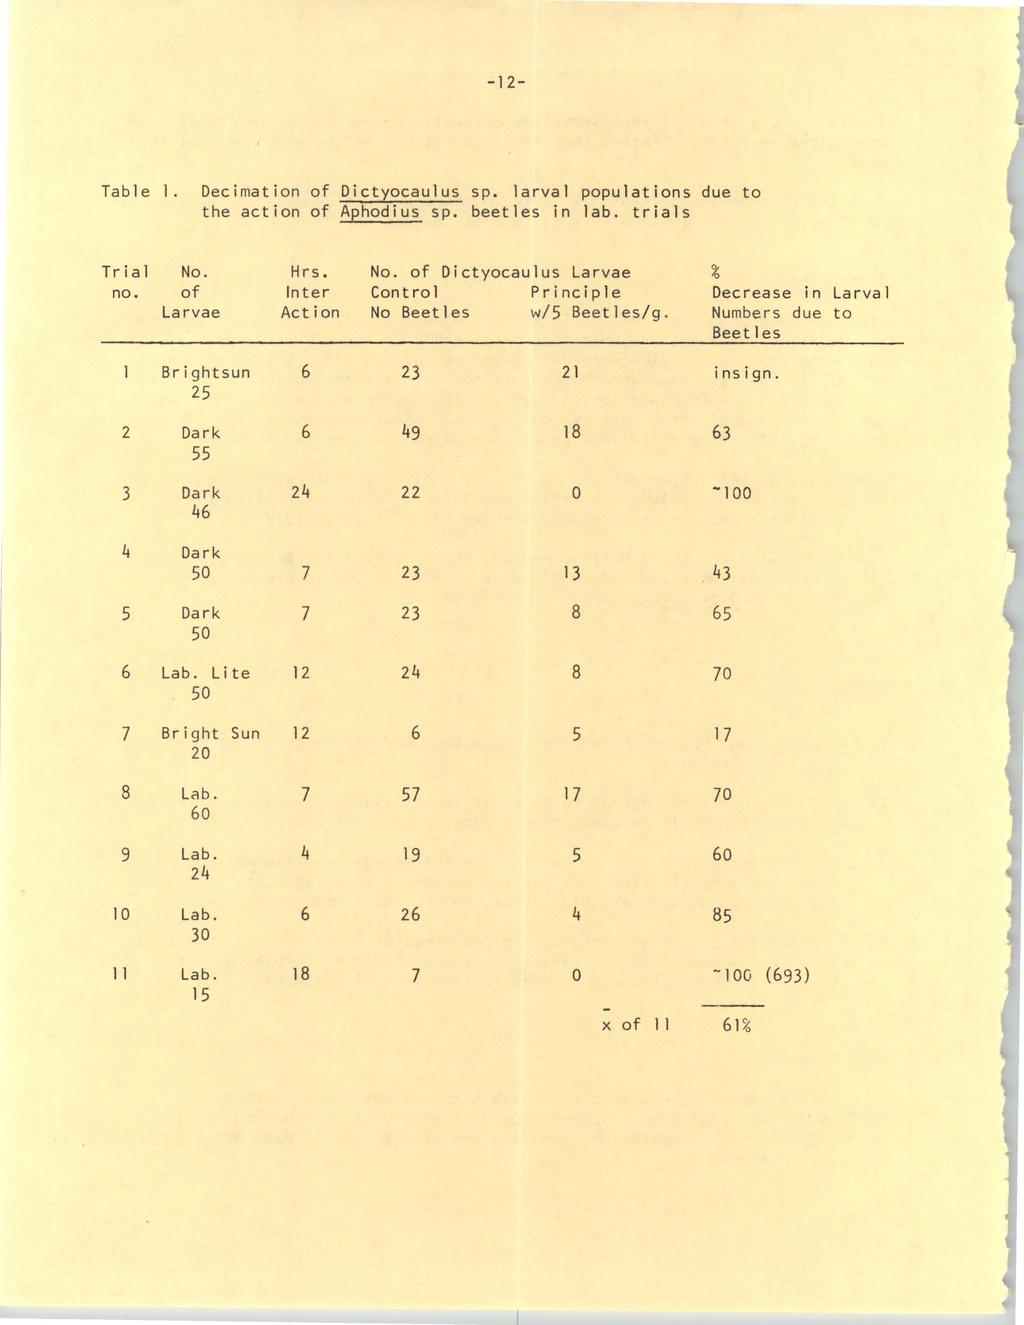 University of Wyoming National Park Service Research Center Annual Report, Vol. 2 [1978], Art. 3-12- Table 1. Decimation of Dict:rocaulus sp. larval populations due to the action of Aphodius sp.